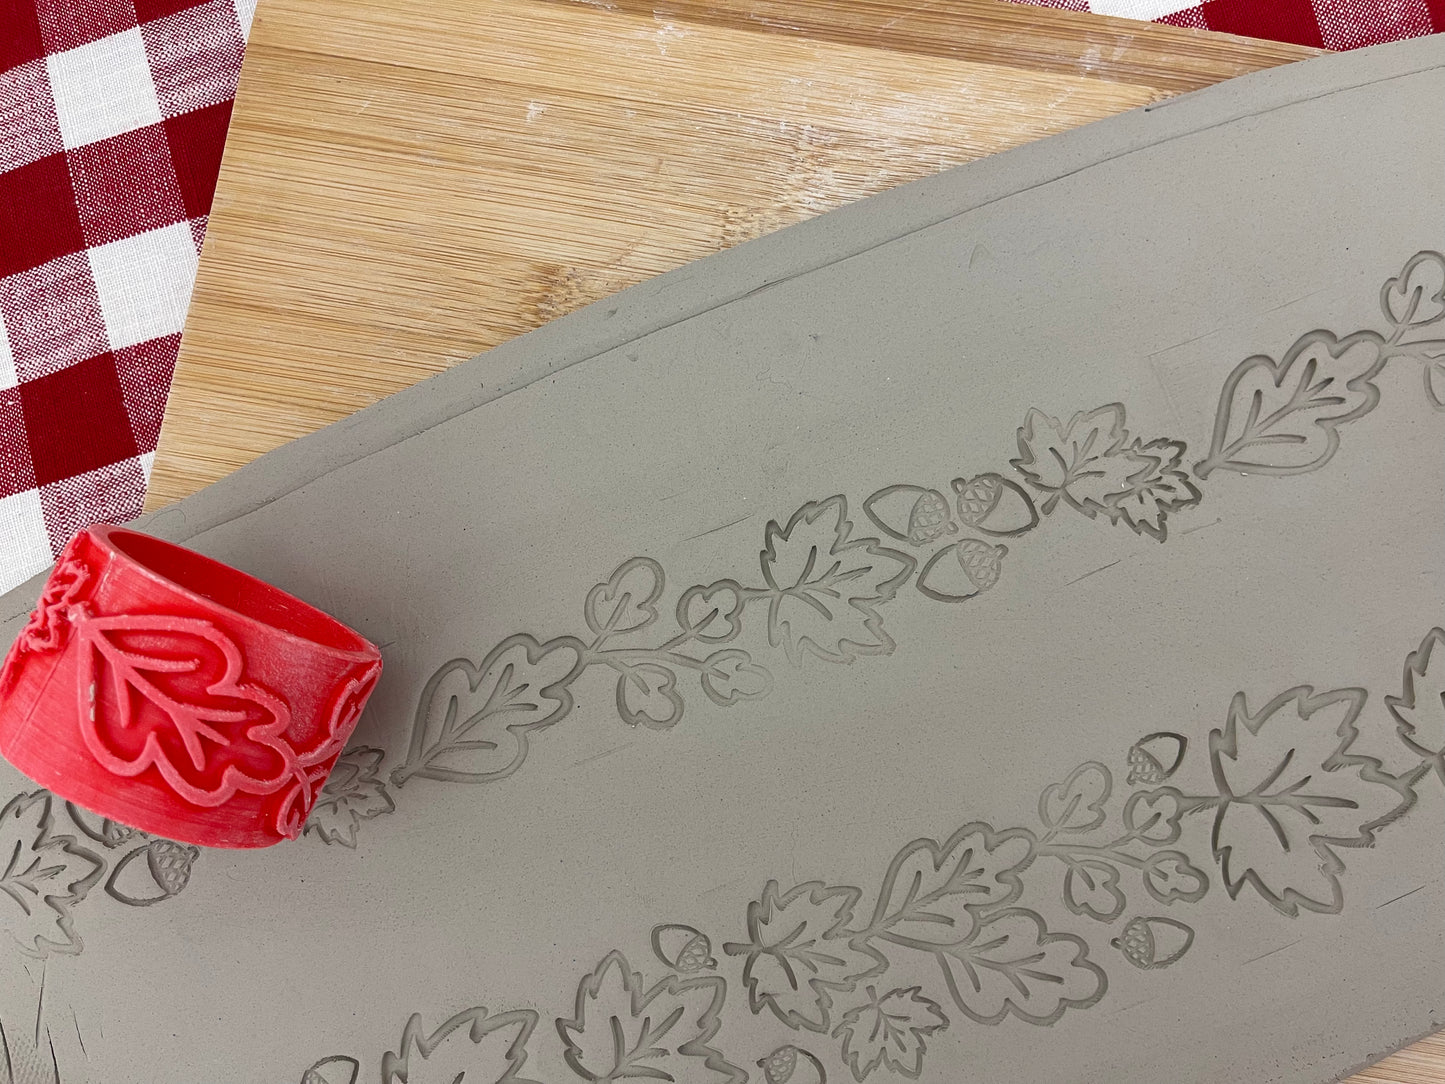 Fall Leaves Pottery Roller Border Stamp, Repeating pattern, 2 sizes, Plastic 3d printed